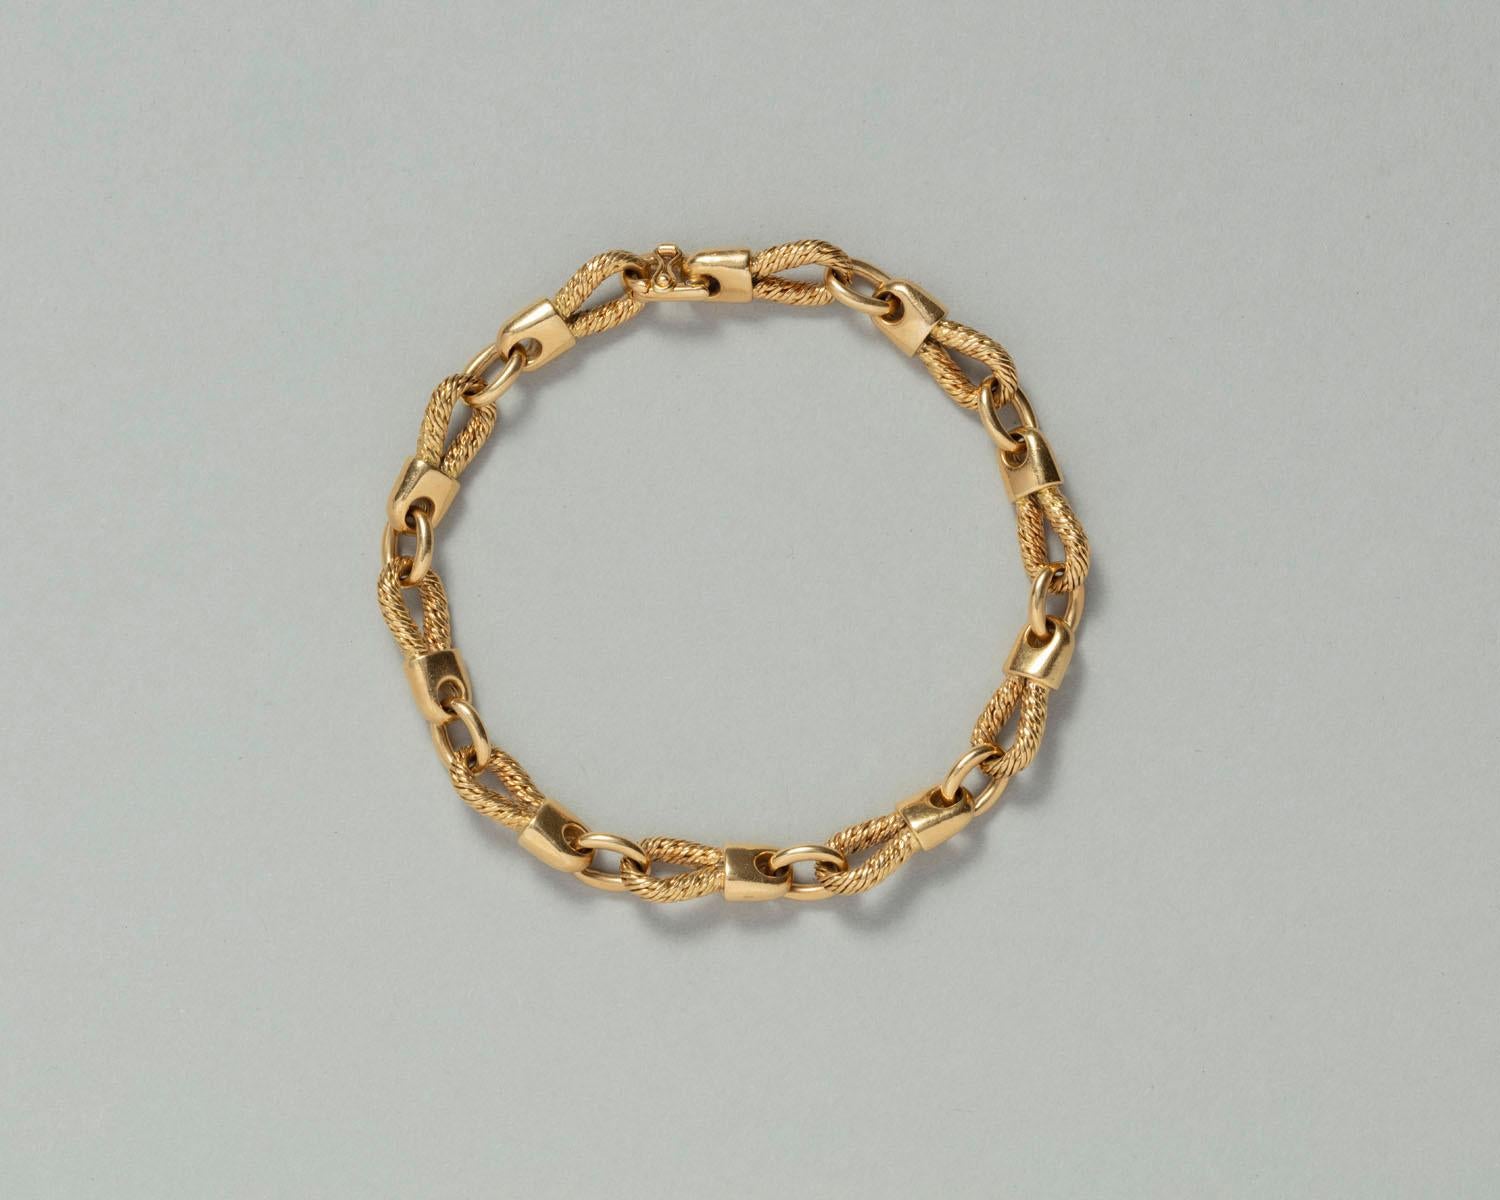 An 18 carat gold bracelet with rope and shackle links, by Georges Lenfant, Paris. 

weight: 30 grams 
length: 20 cm
